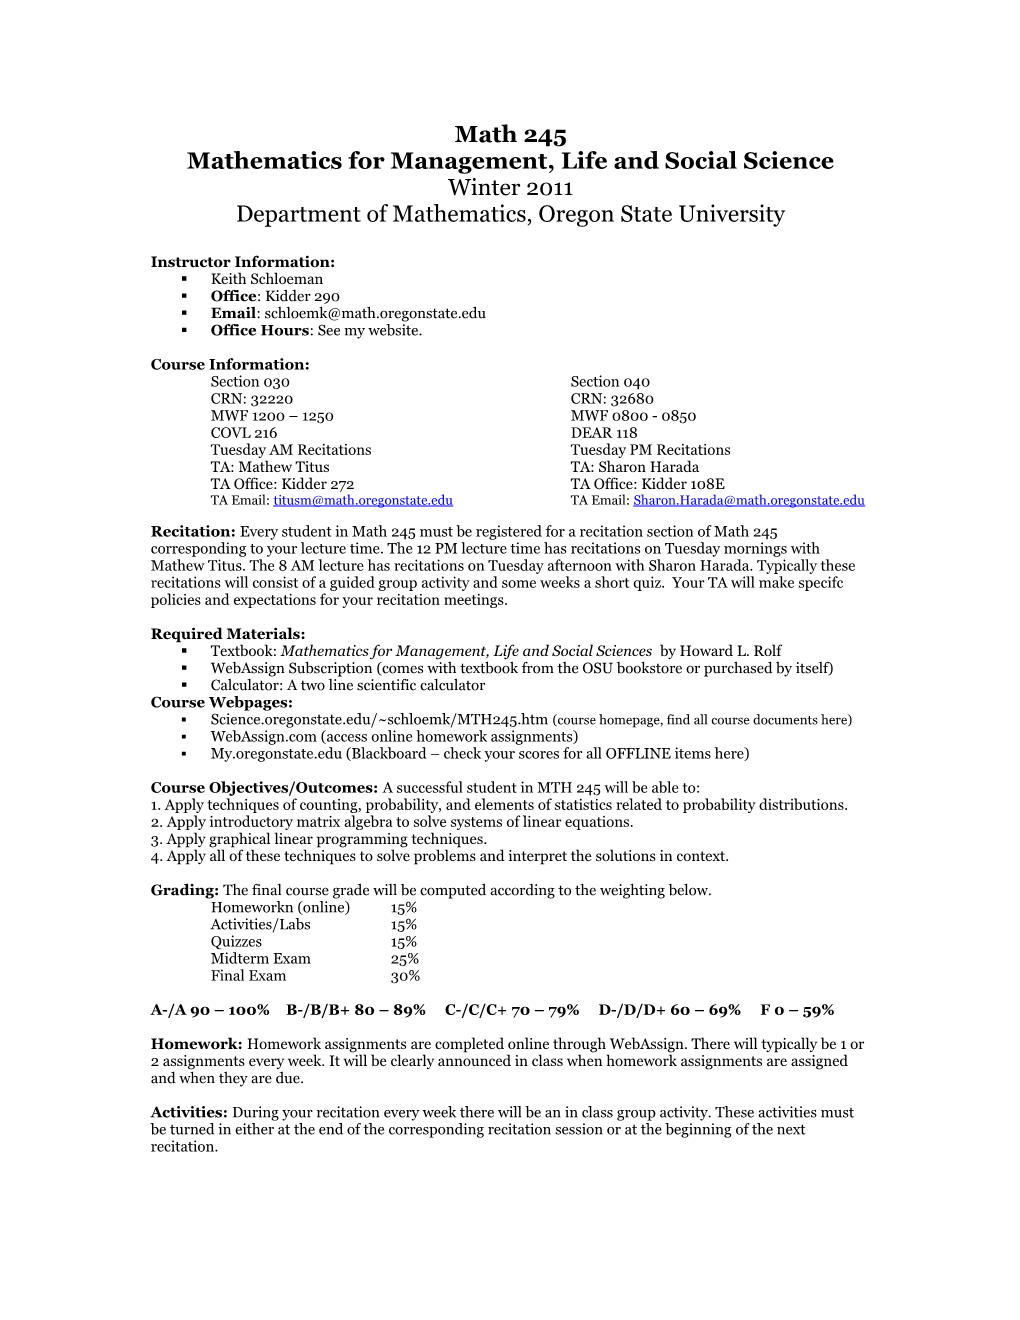 Mathematics for Management, Life and Social Science